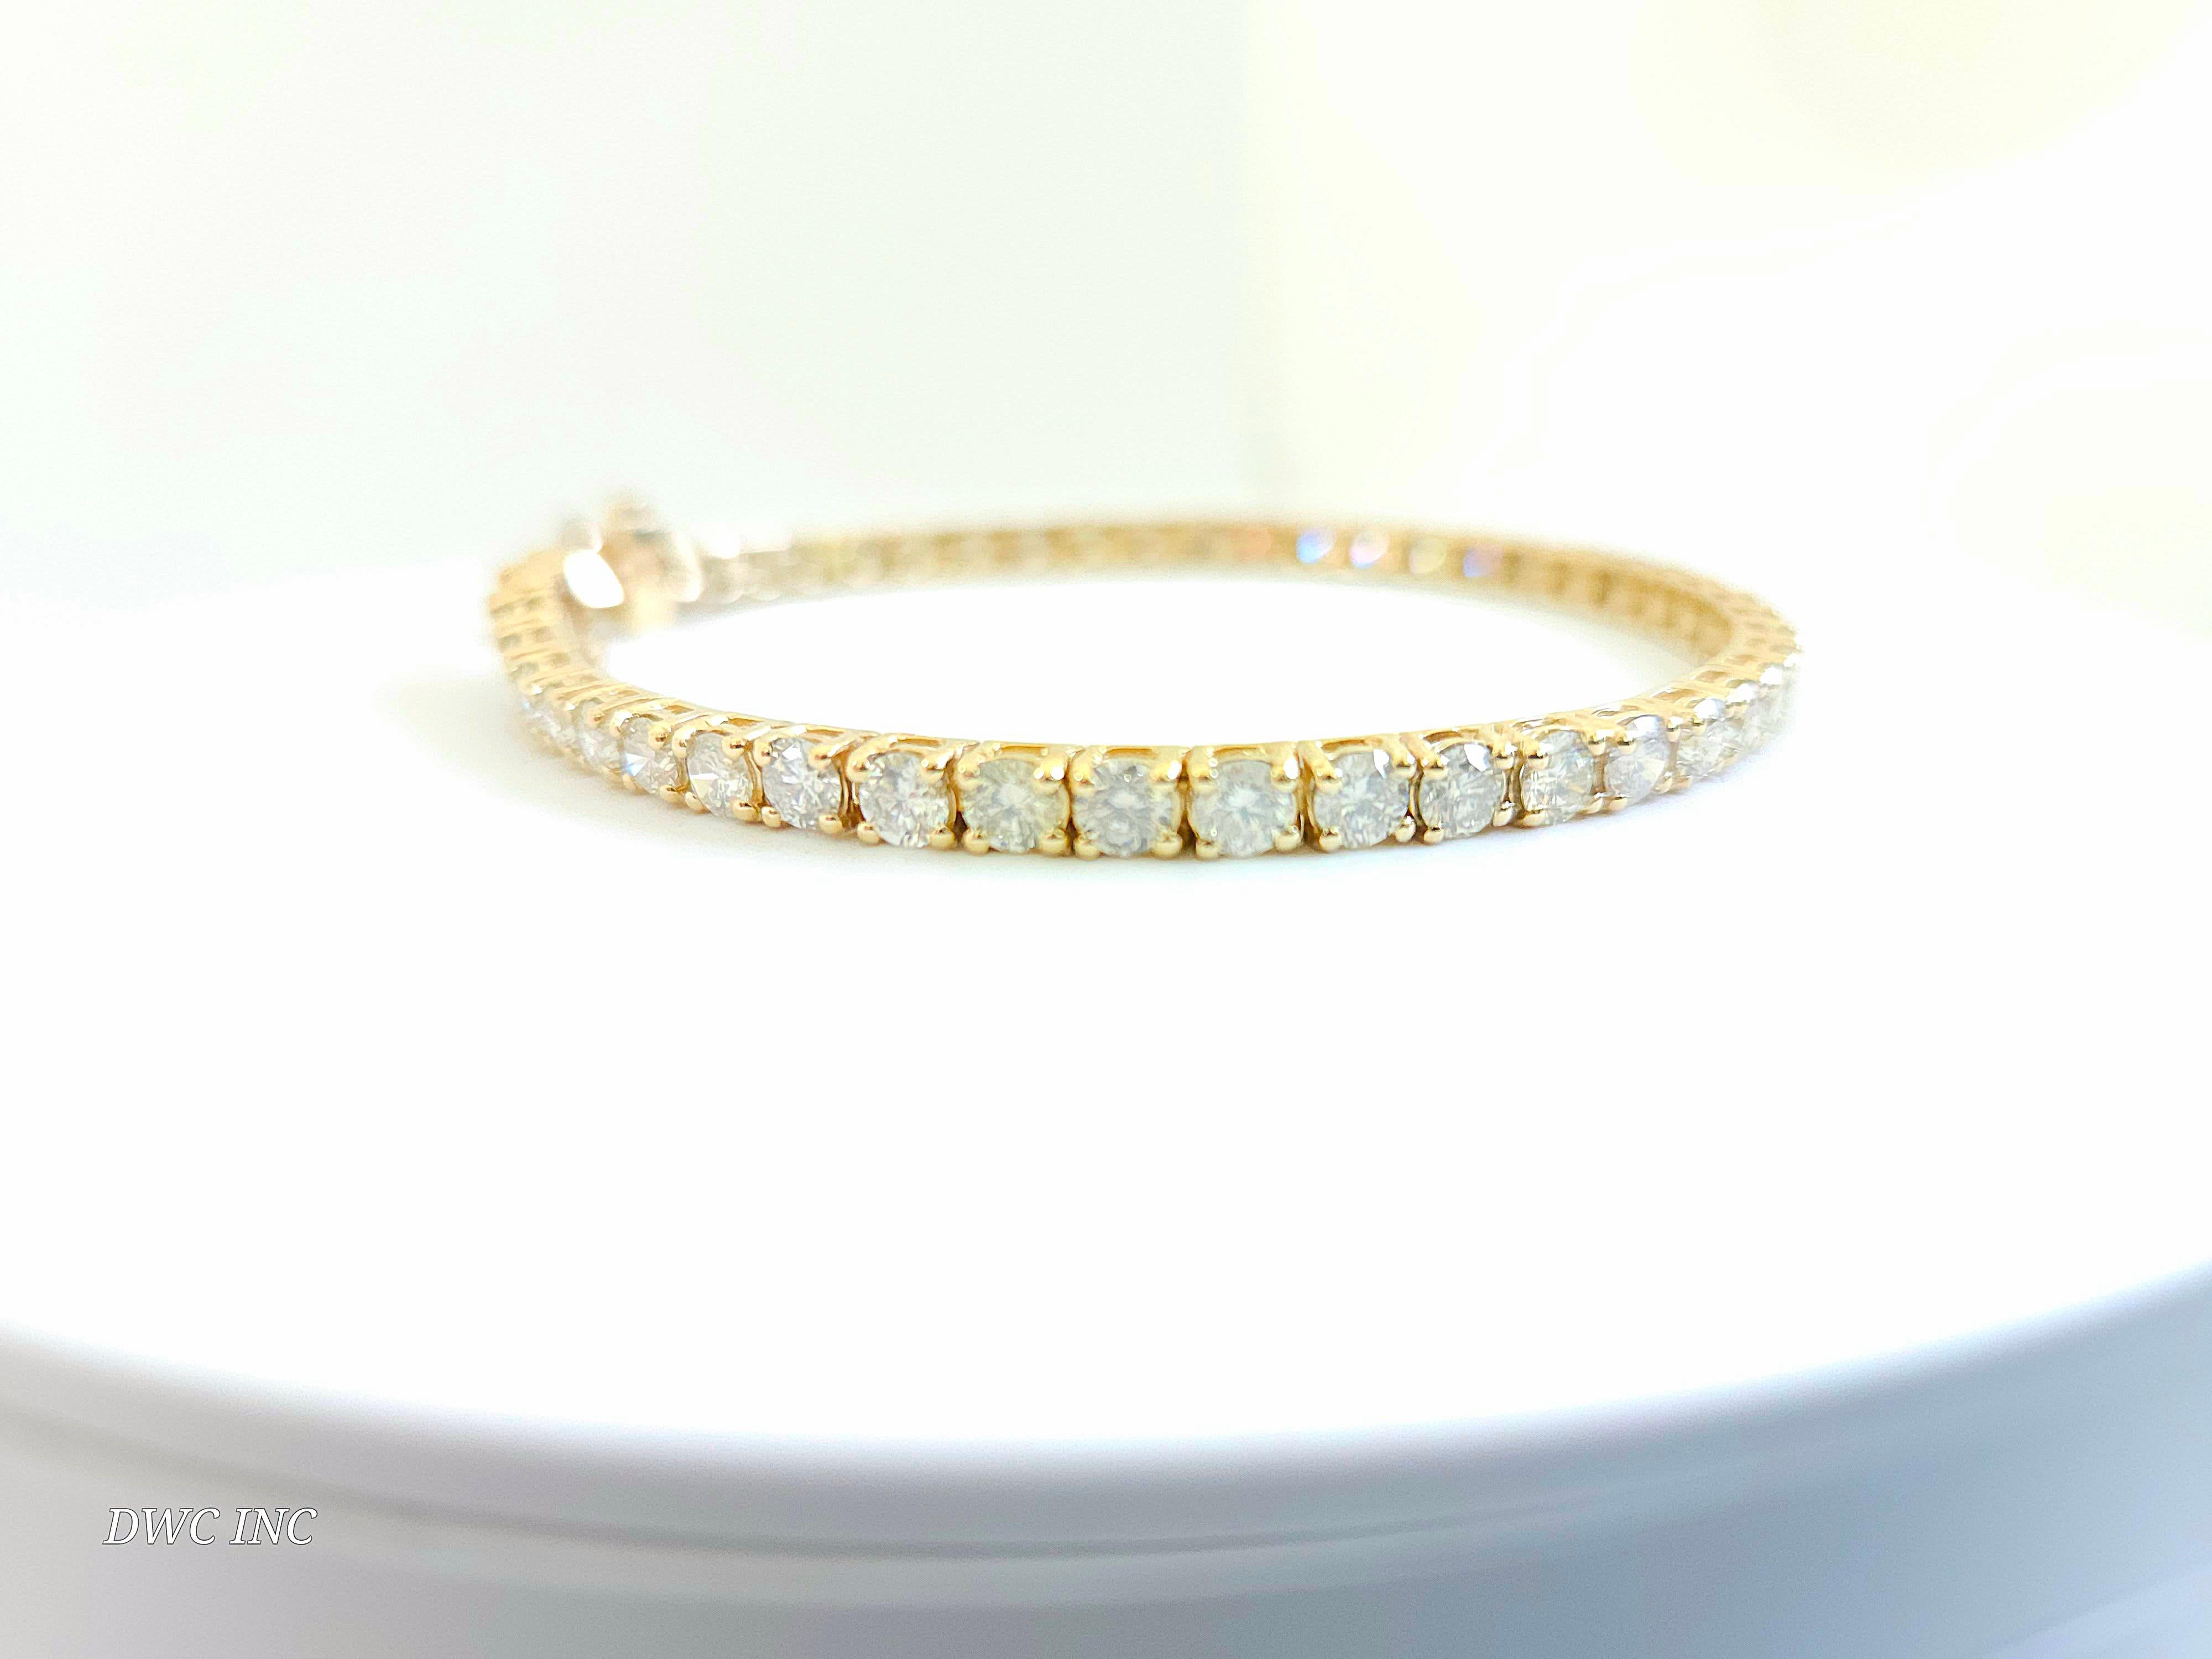 Natural diamonds tennis bracelet round-brilliant cut  14k yellow gold. 
7 inch. Average Color H, Clarity SI, 3.50 mm wide,46 pcs, 12.55 grams very shiny don't miss.

*Free shipping within U.S*

